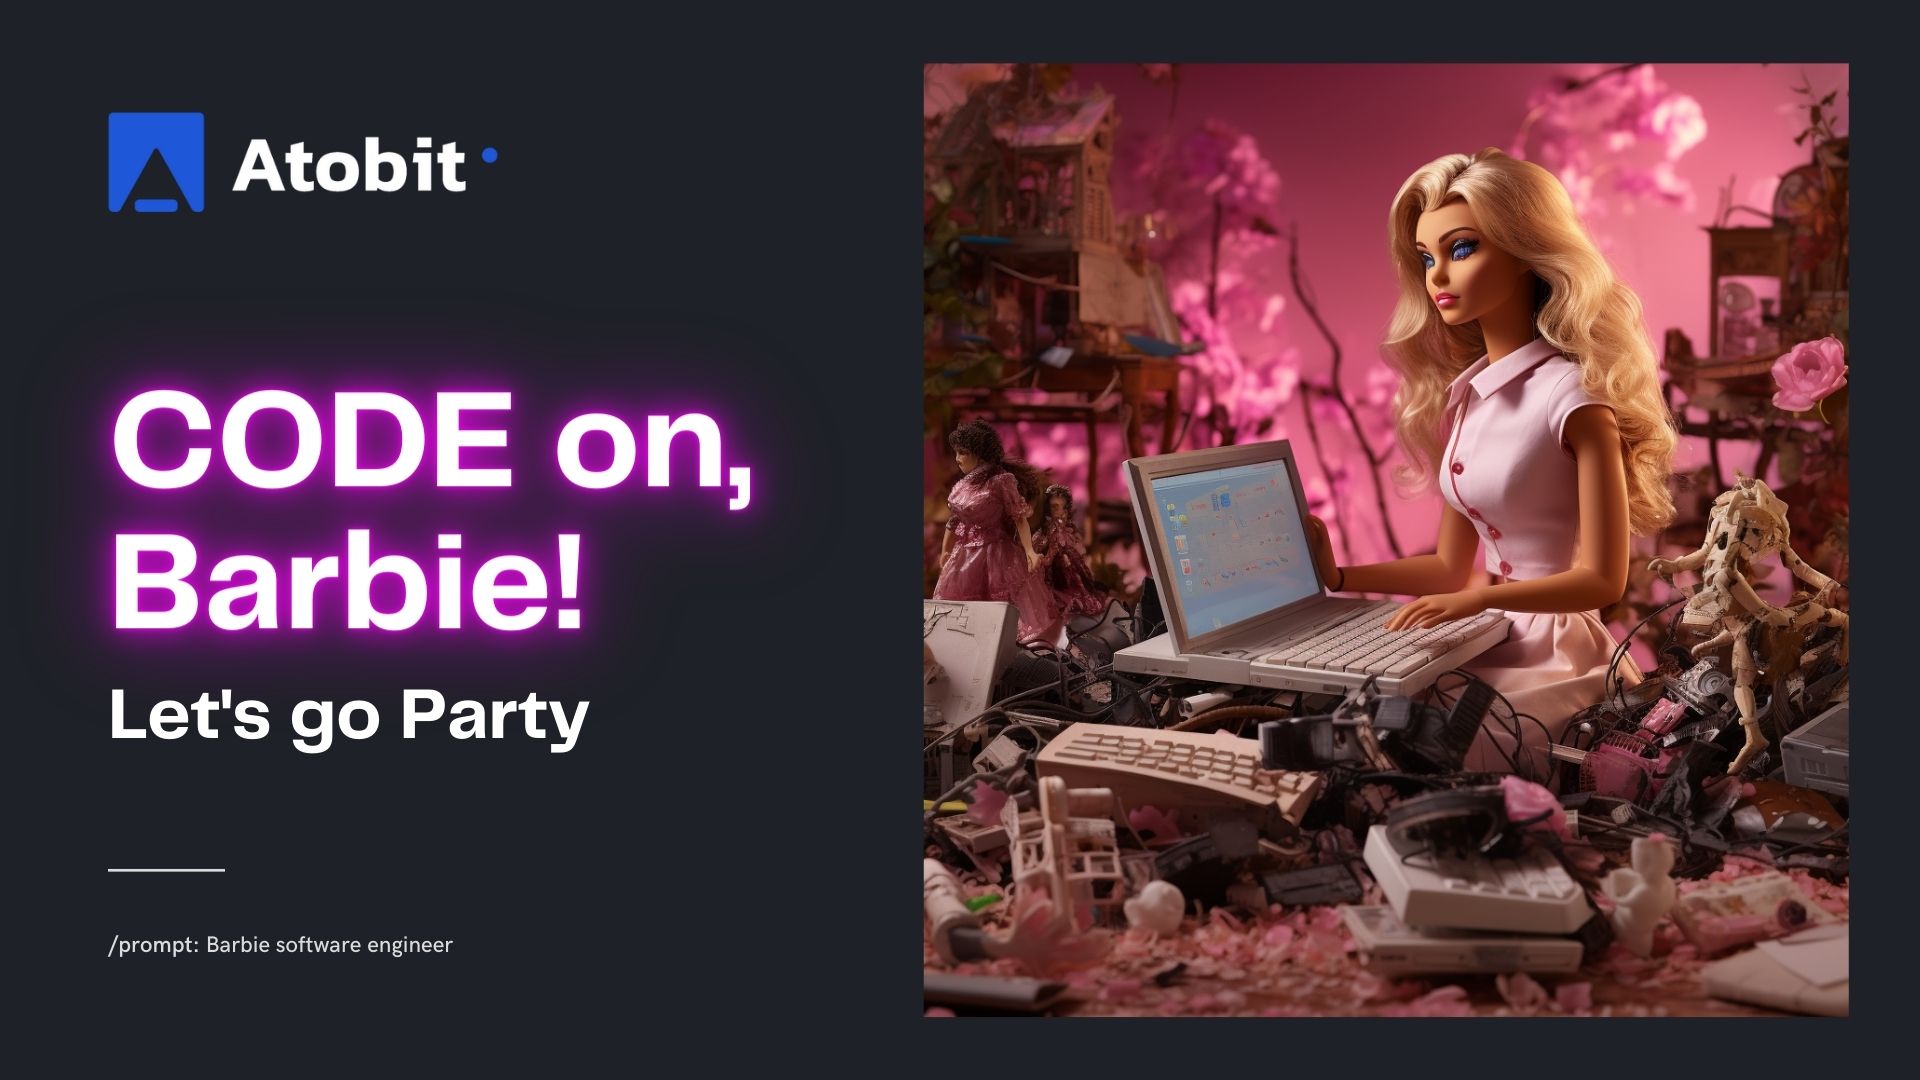 CODE on, Barbie. Let's go Party